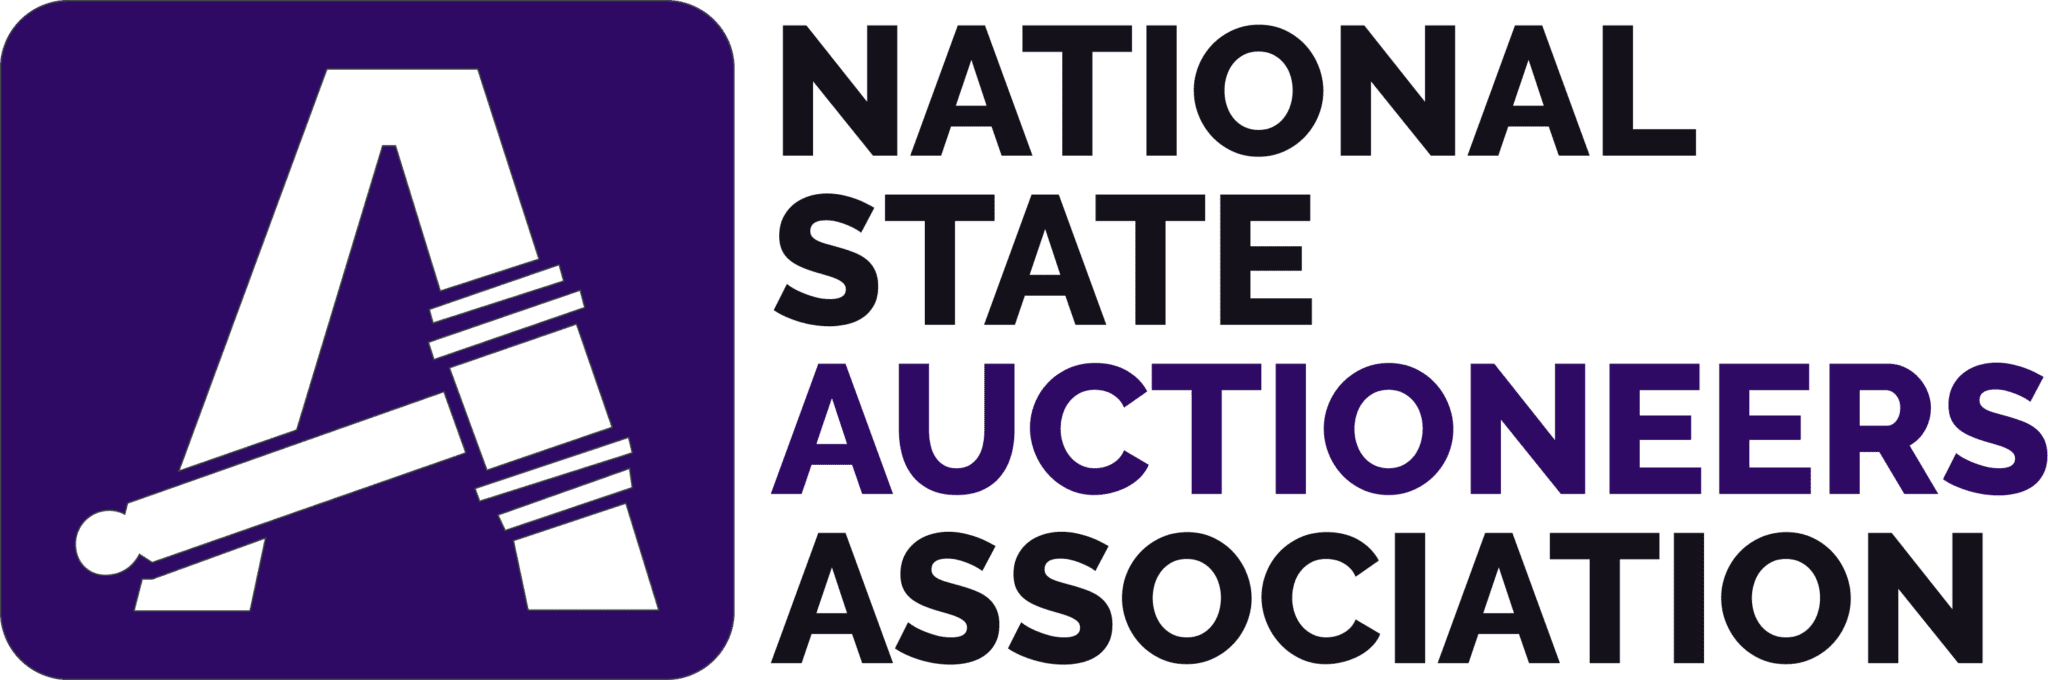 next state auction  Suduco asset auctioneers